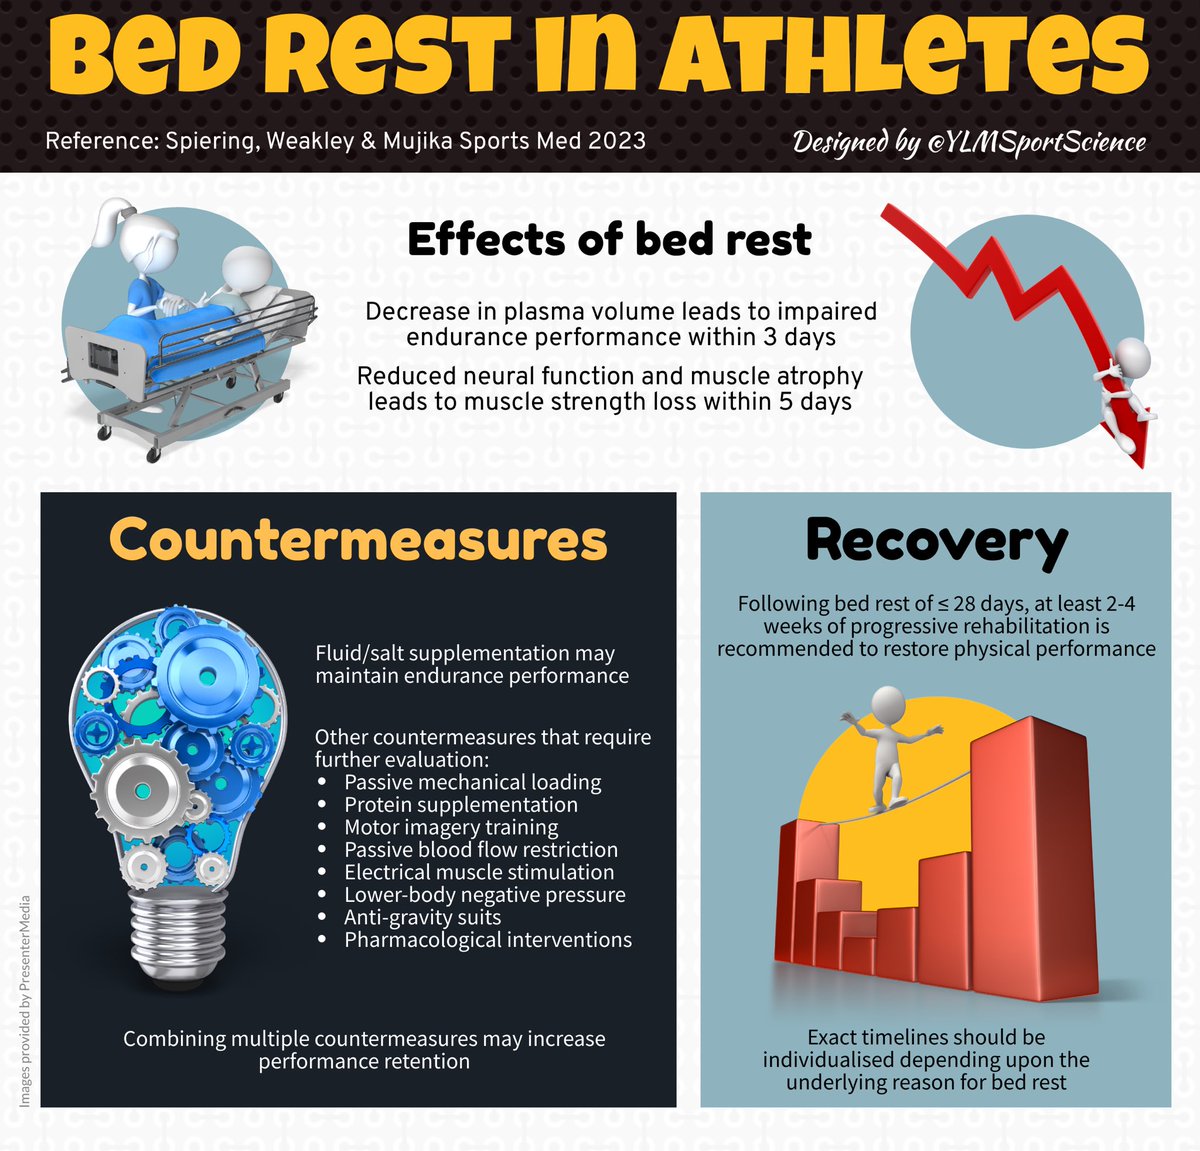 #New 🛌📈 How athletes can rebound after bed rest by @jonathon_weakley_phd, @inigomujika_en & Barry Spriering in @SportsMedicineJ 📖 Free full-text article: link.springer.com/article/10.100…